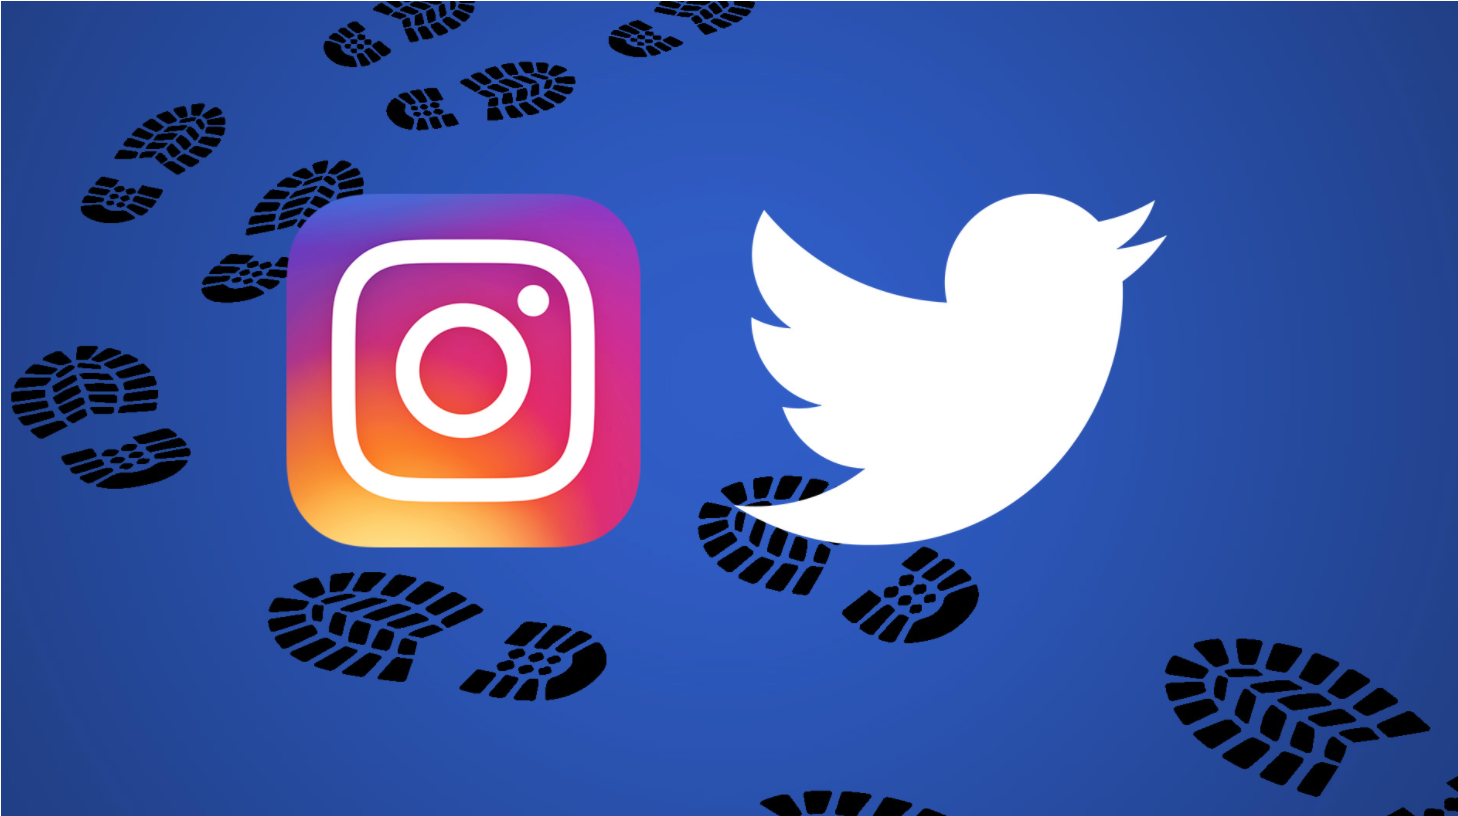 Instagram's Twitter-like app is going to be launched this week.